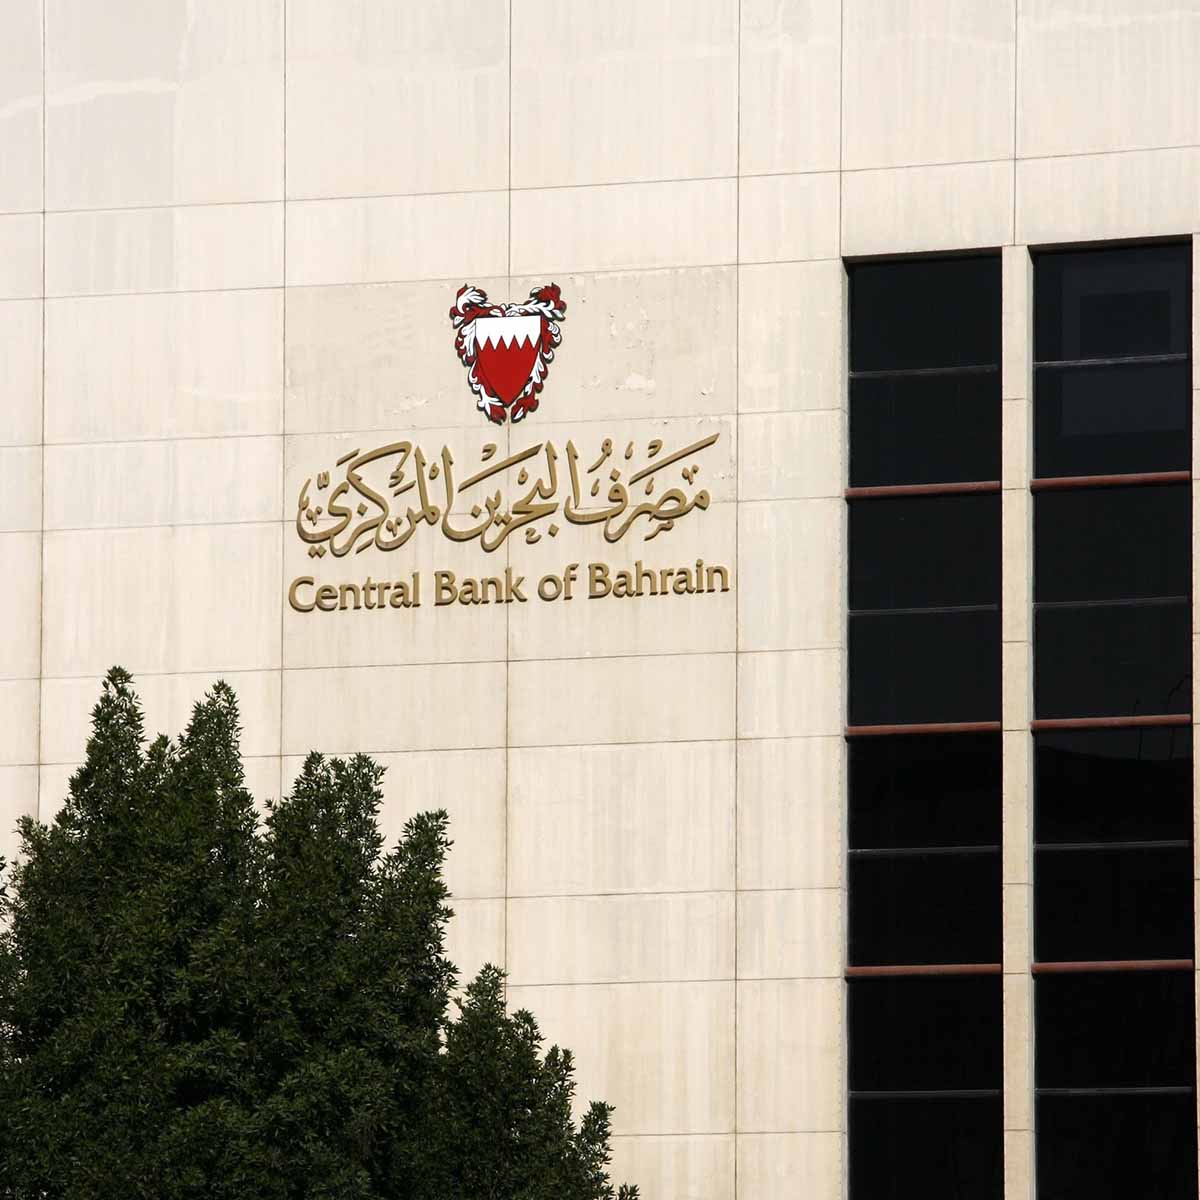 The Central Bank of Bahrain published a new legal and regulatory framework for cryptocurrencies